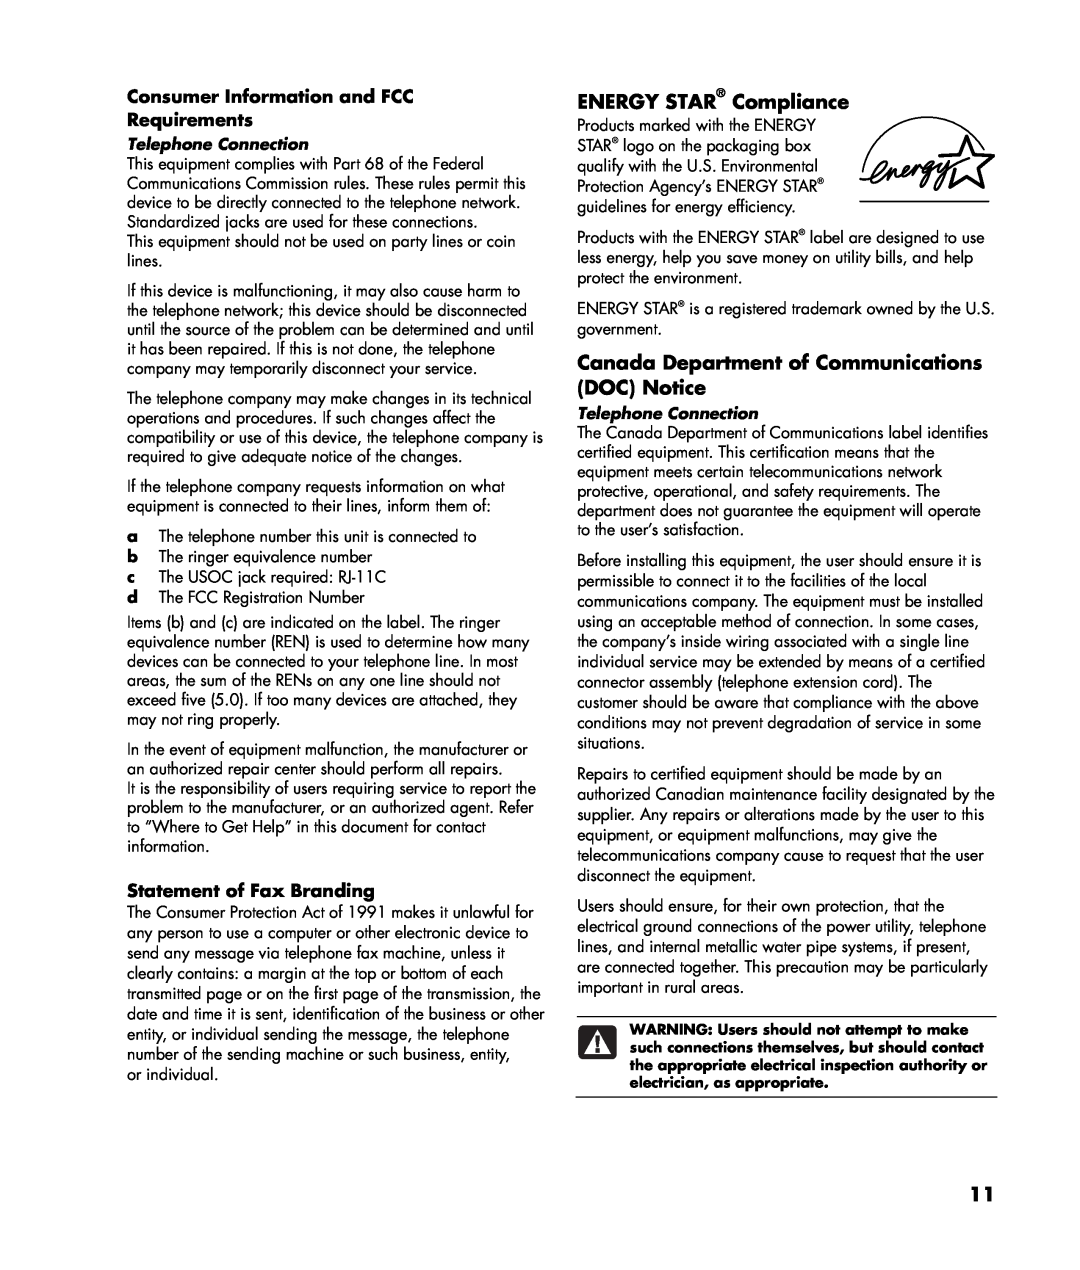 HP SR5050NX, a1700n manual ENERGY STAR Compliance, Canada Department of Communications DOC Notice, Statement of Fax Branding 